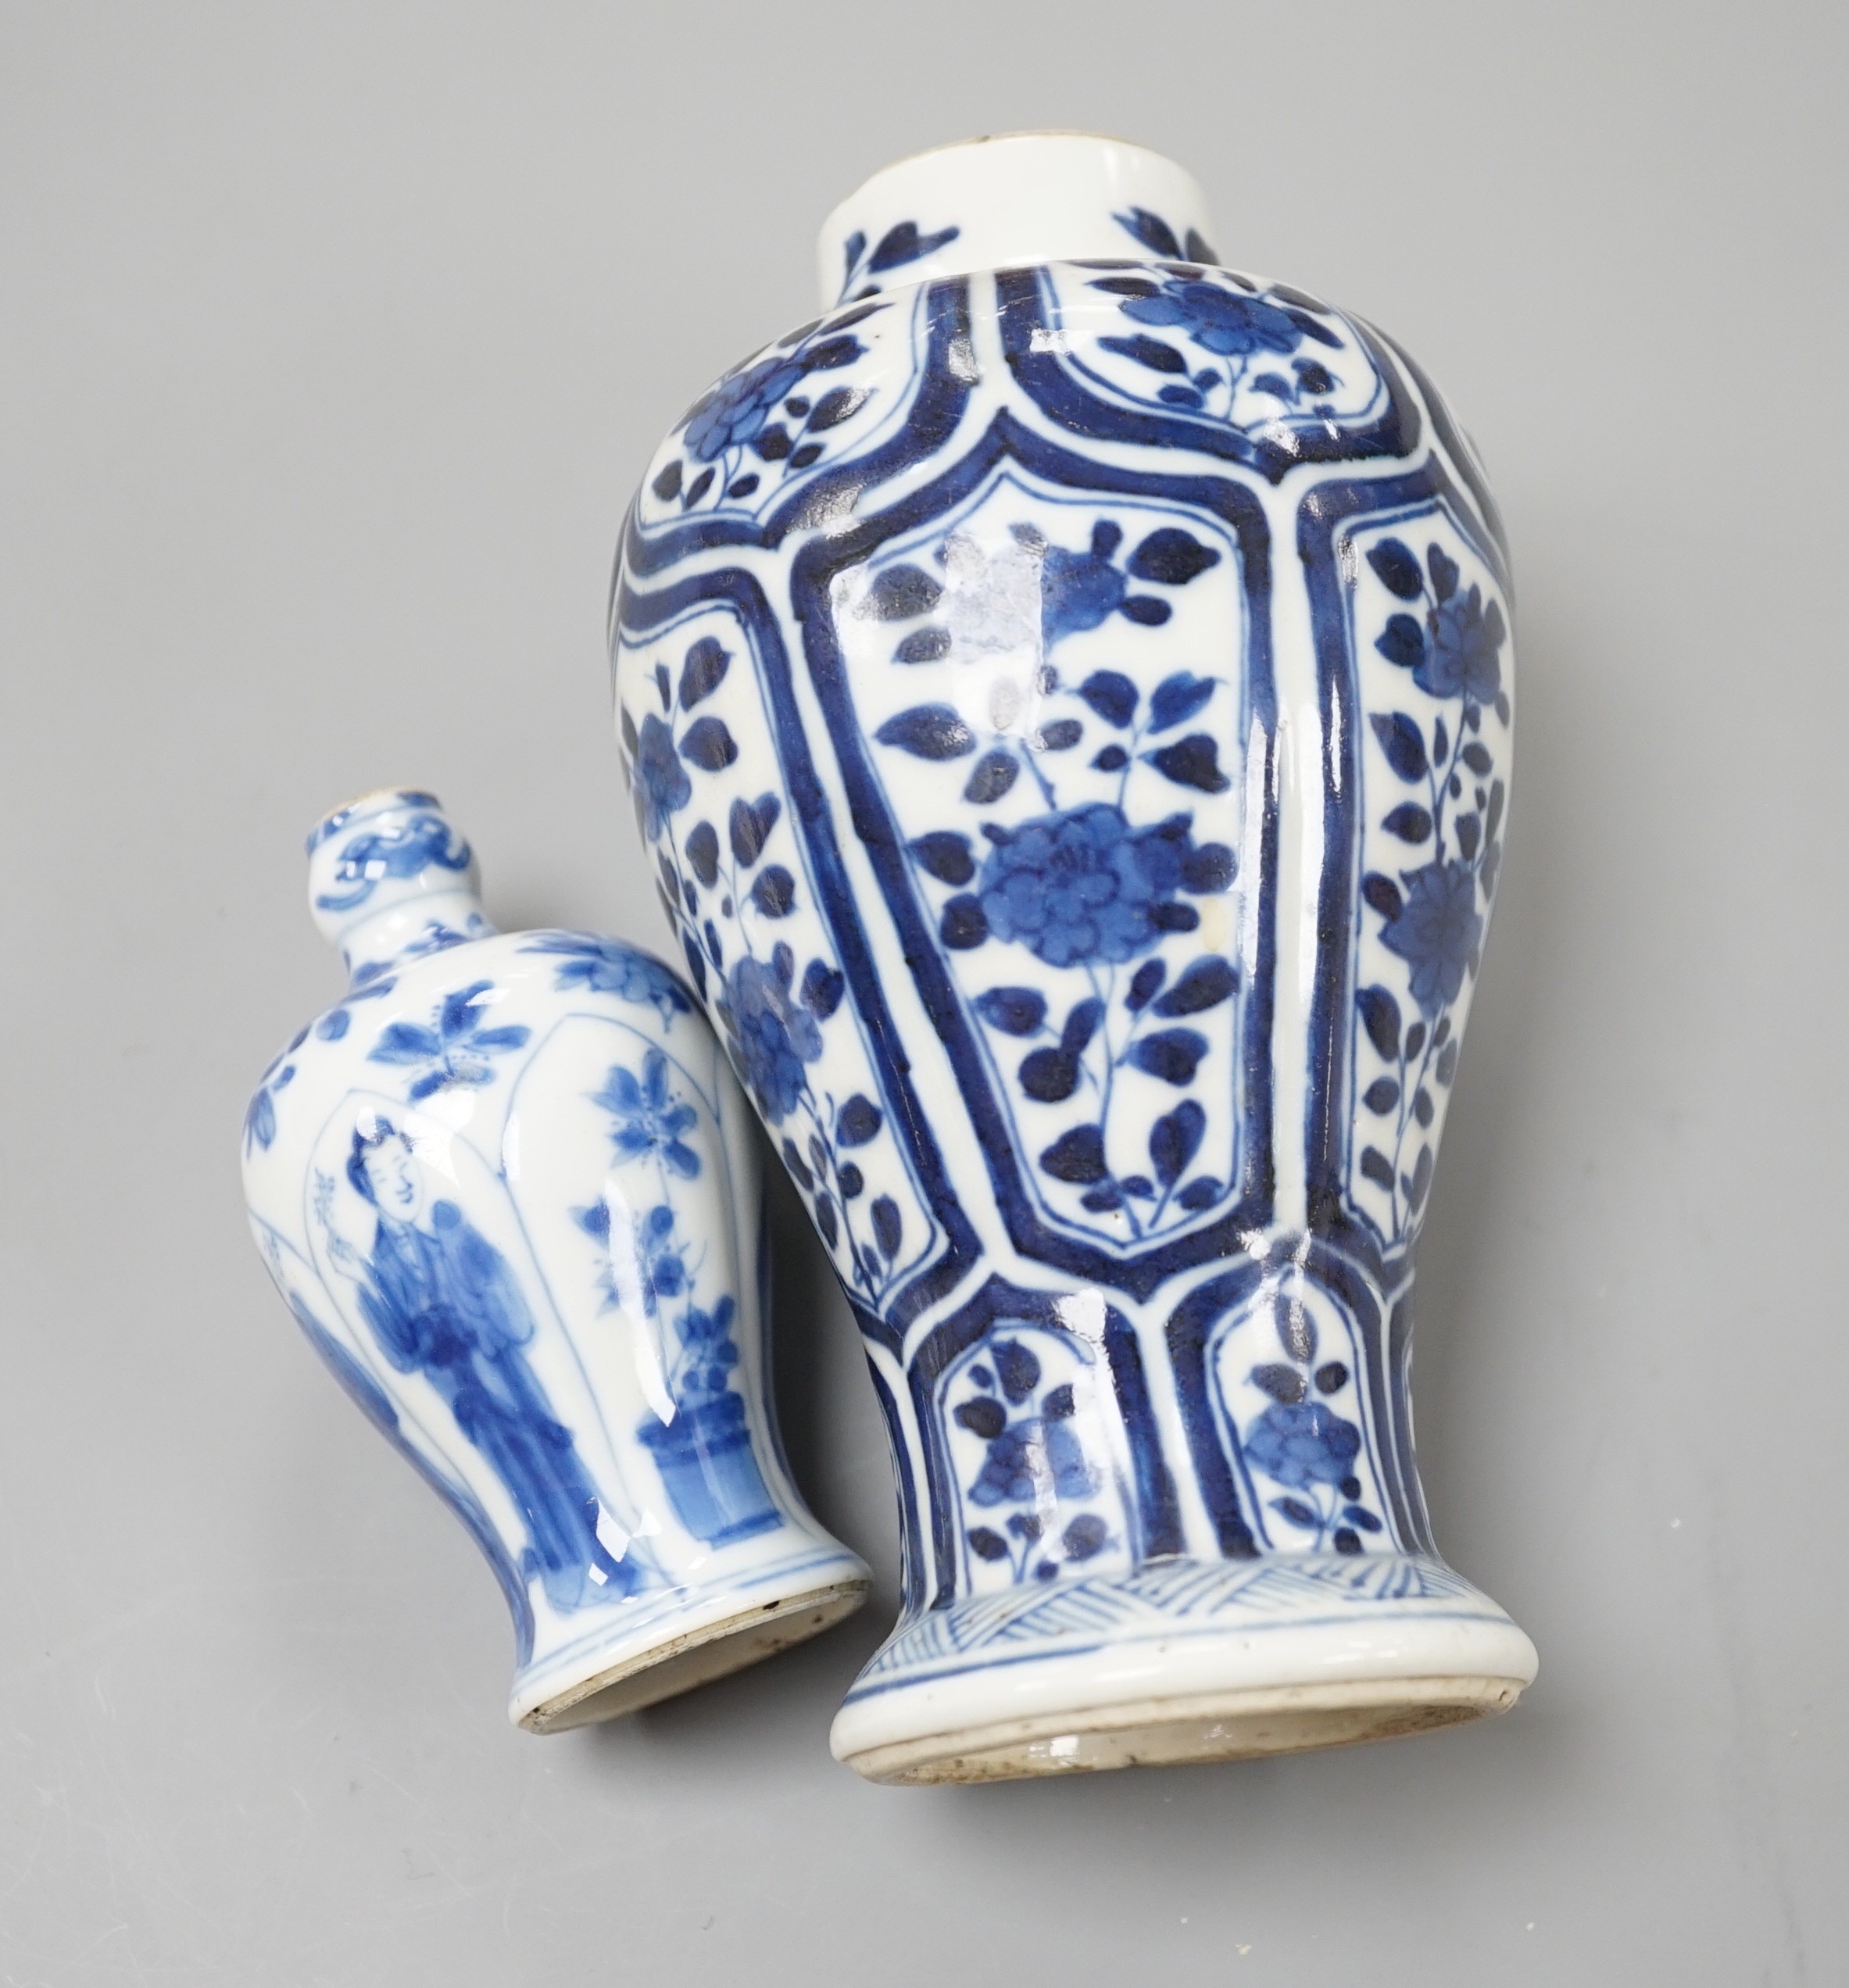 Two Chinese Kangxi blue and white vases, the smallest marked ‘yu’ (jade), tallest 15 cms high.